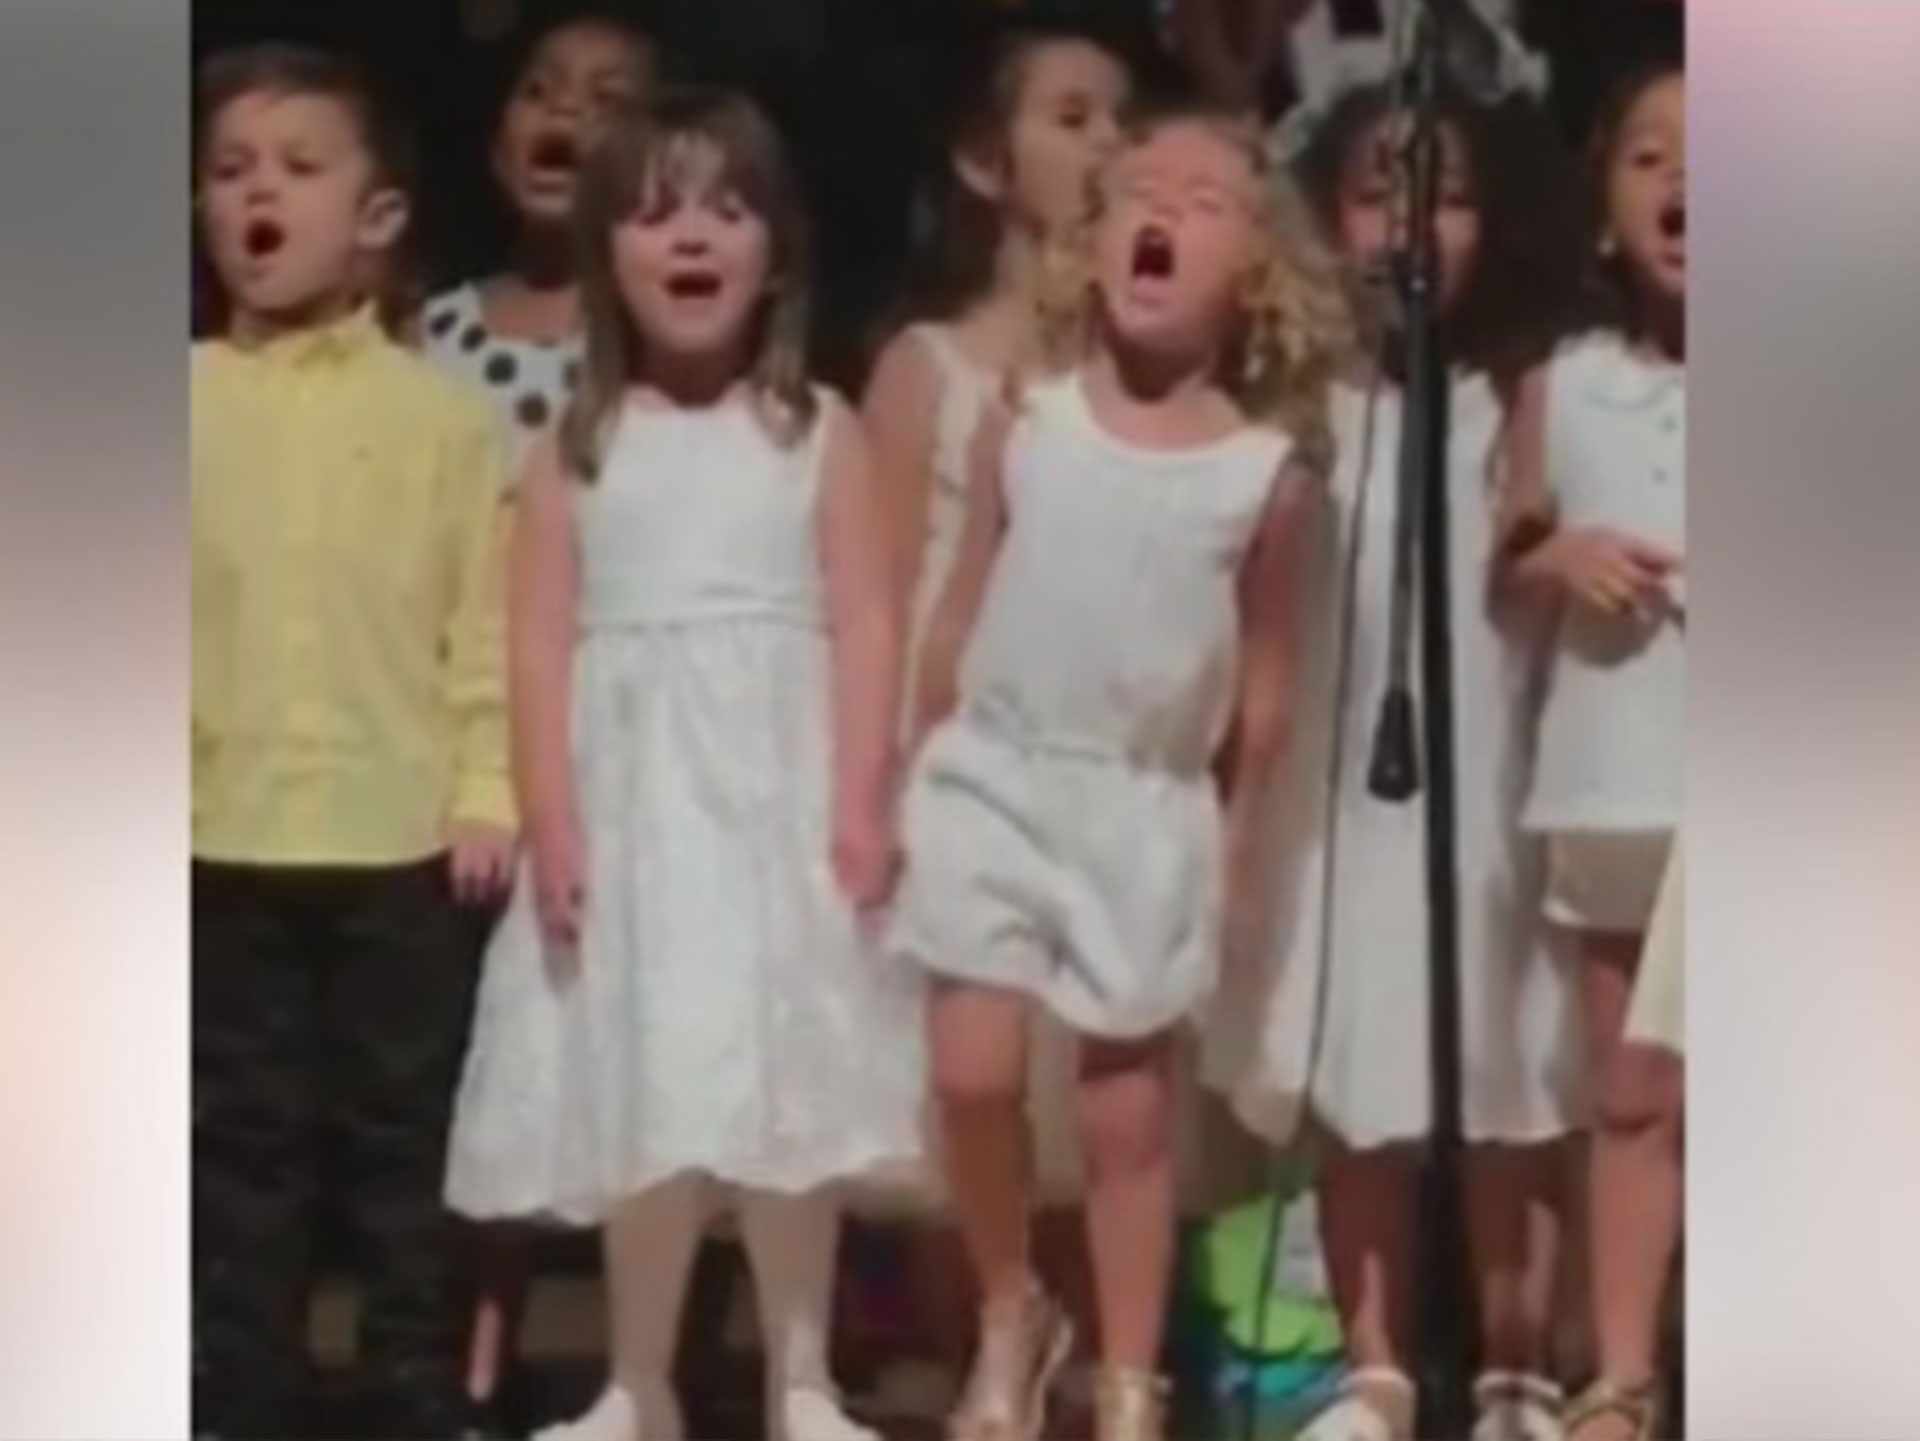 Four-year-old gives an adorably passionate performance of Moana’s song